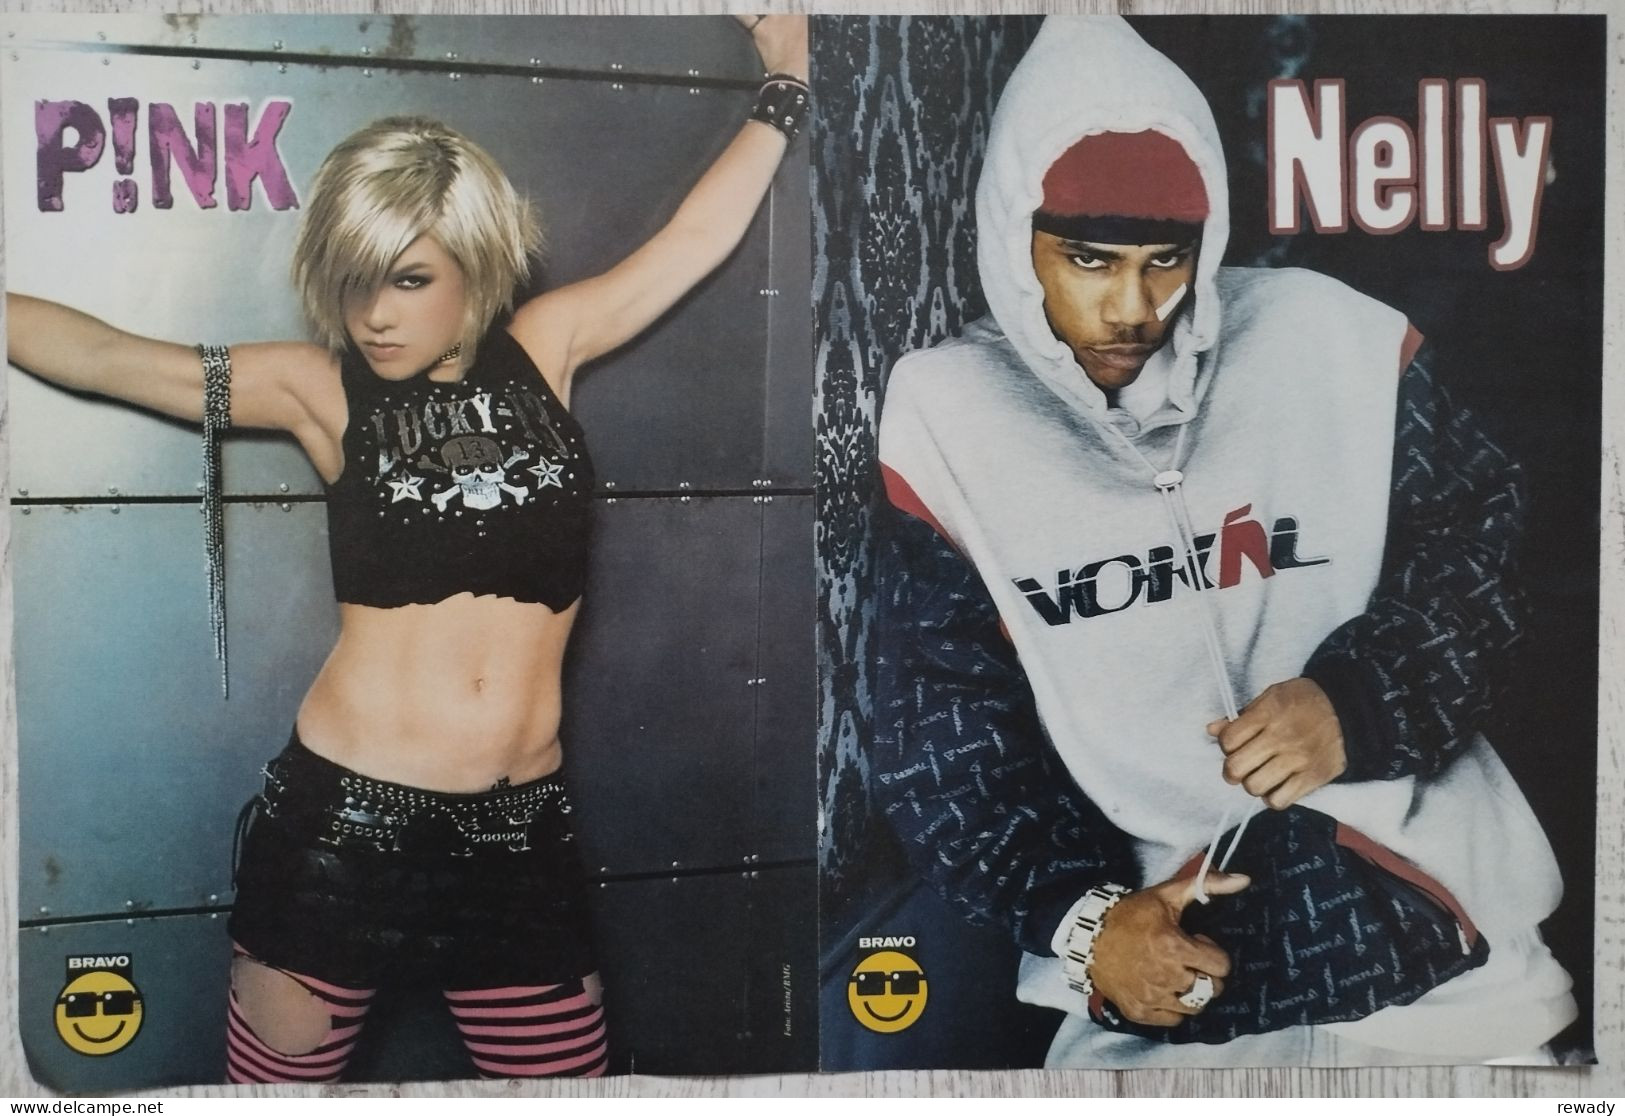 Eminem - Pink - Nelly - Poster - Affiche (270x430 Mm) - Afiches & Pósters